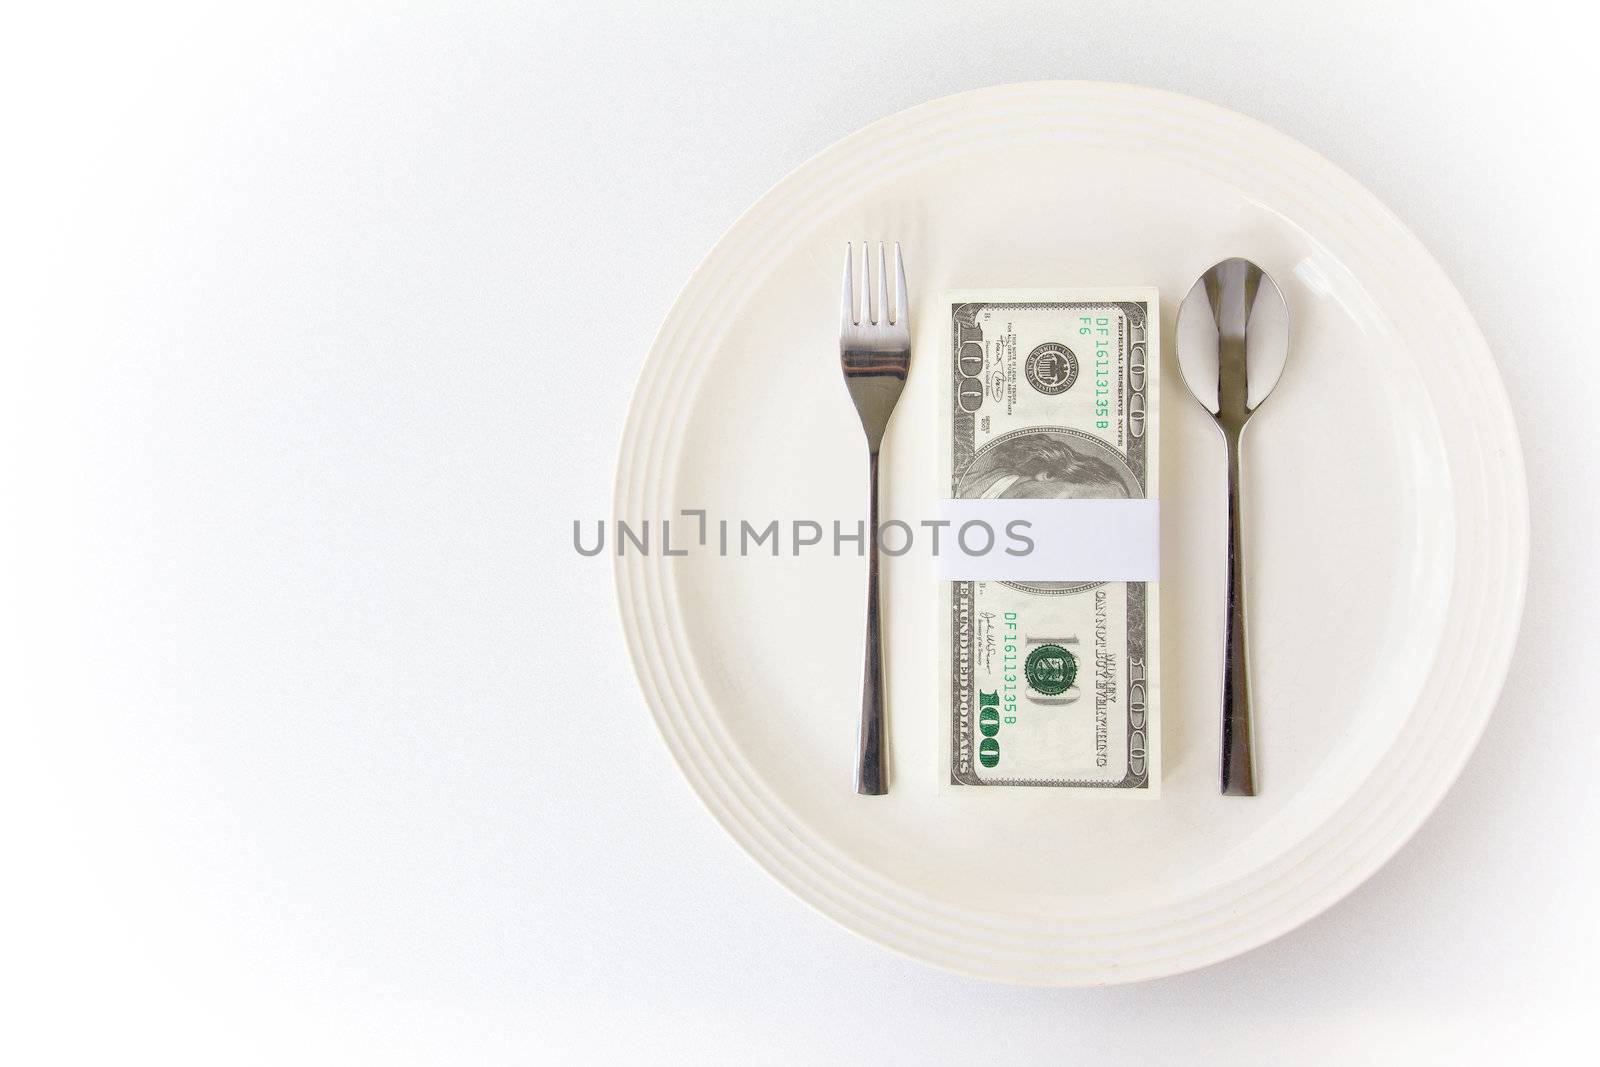 Concept image of food money